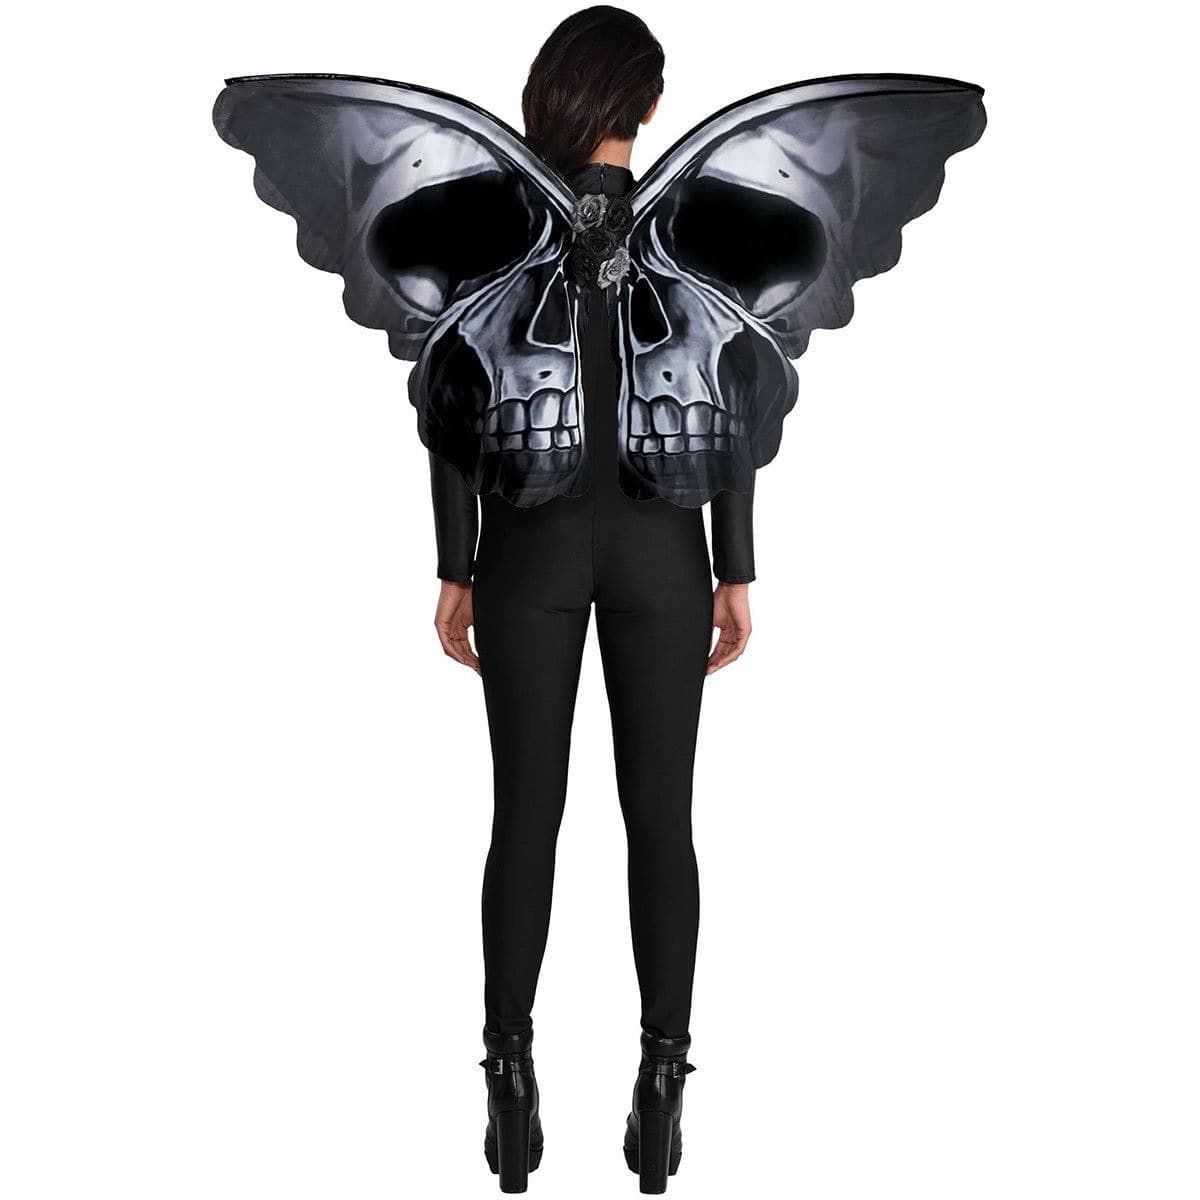 Buy Costume Accessories Skeleton Butterfly Wings sold at Party Expert